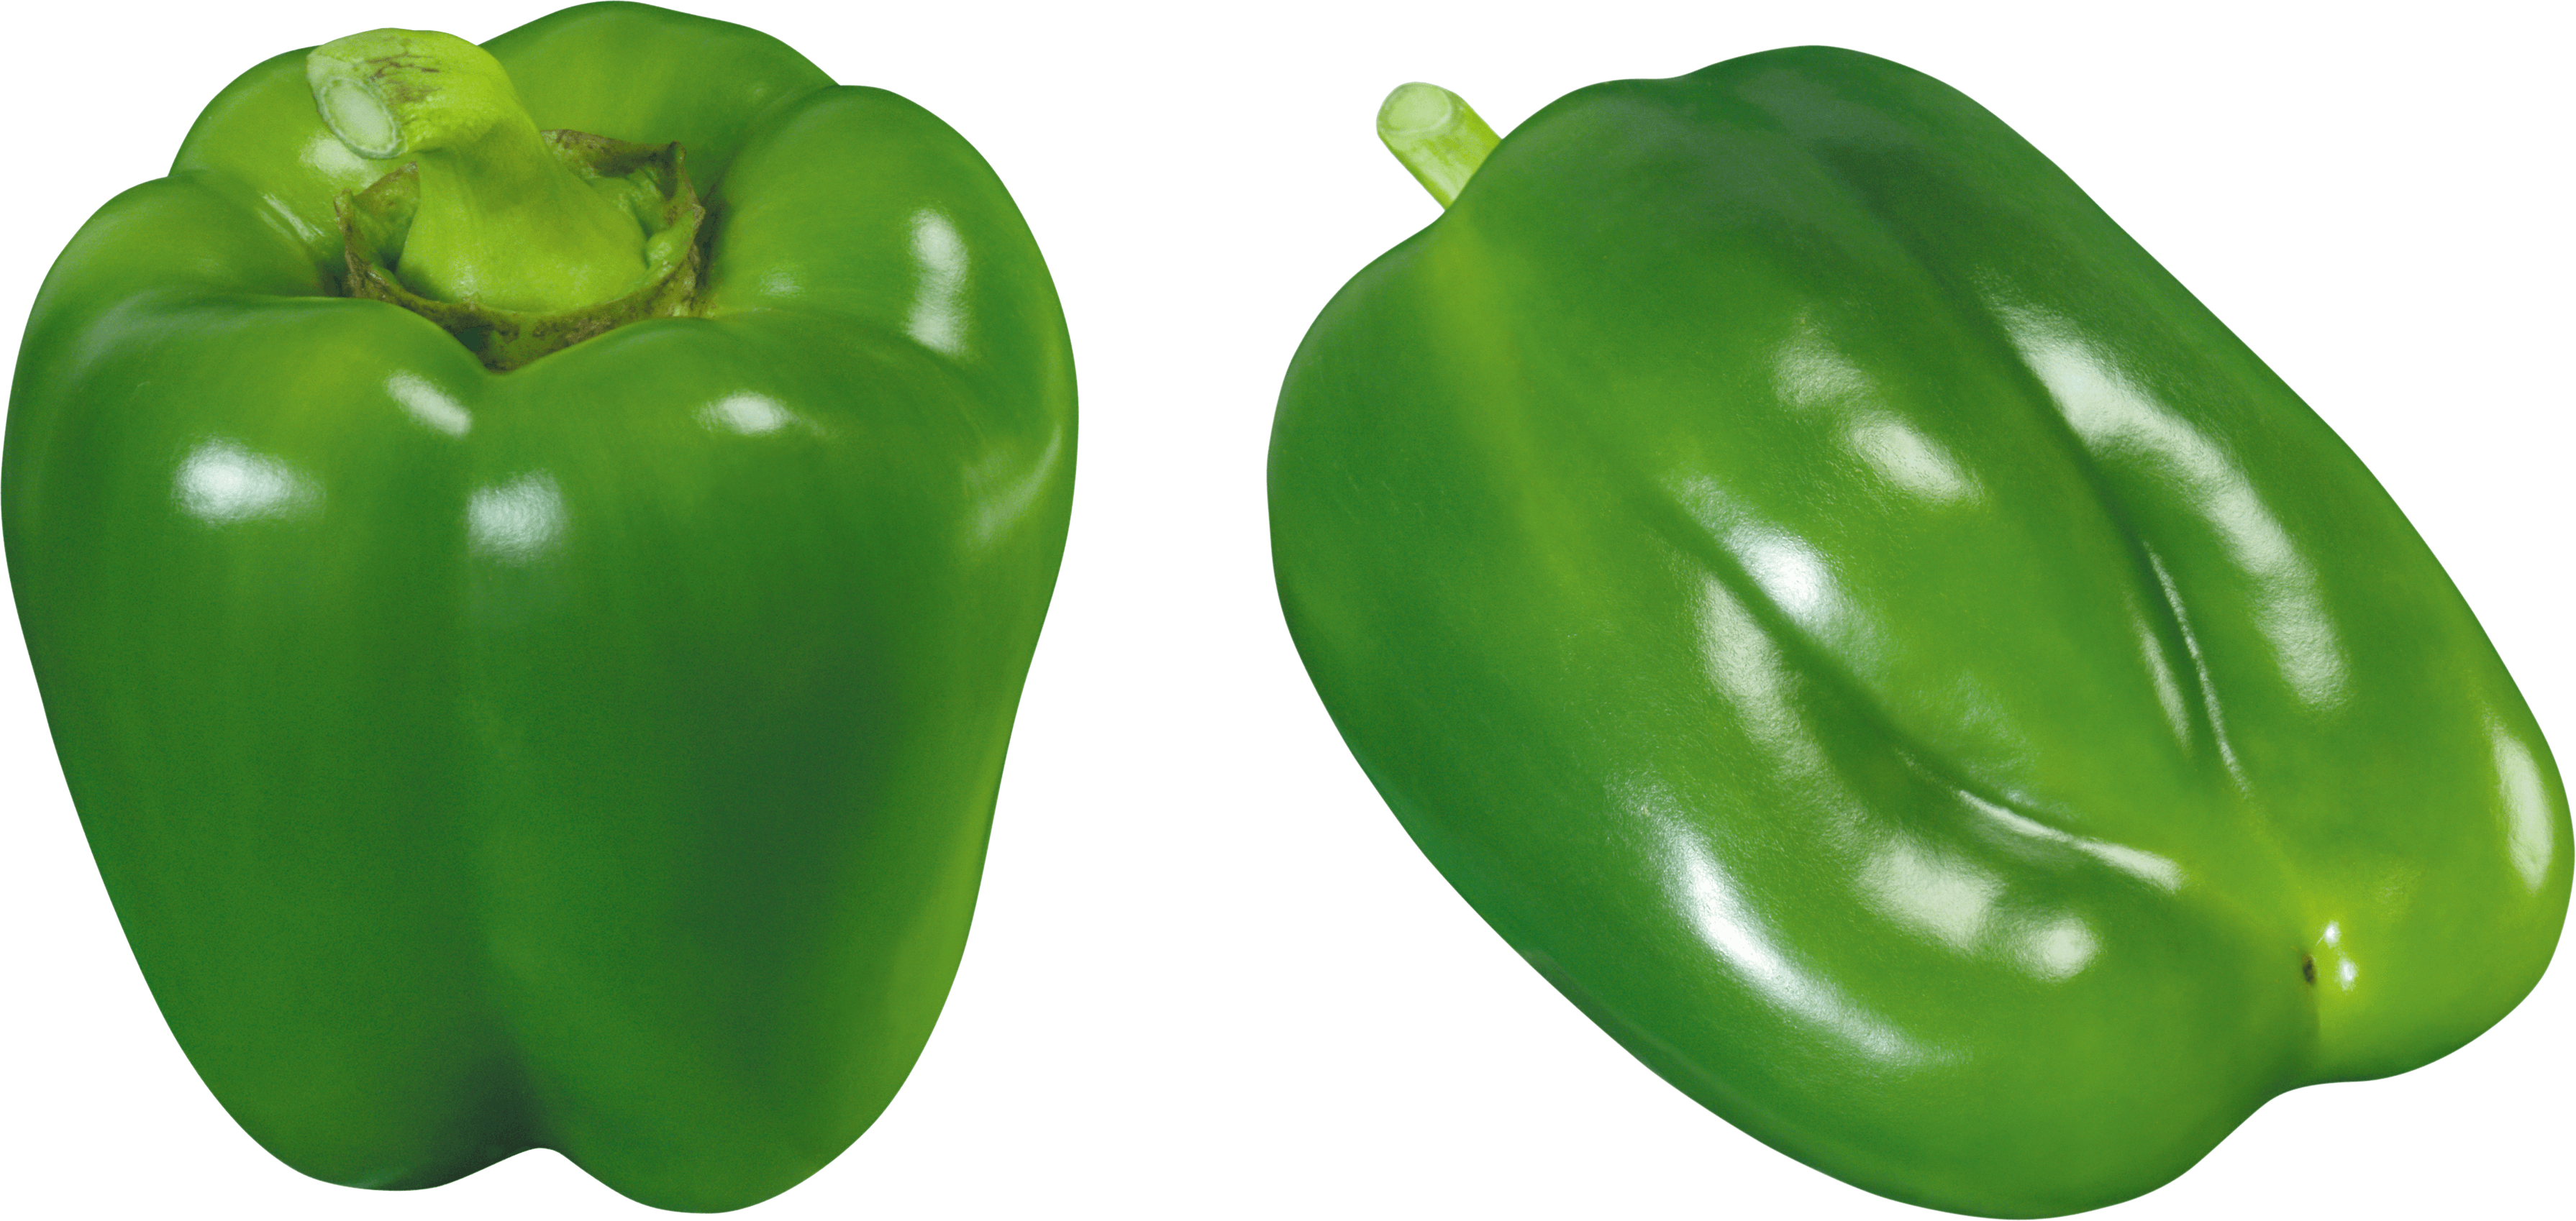 Green Pepper Png Image PNG Image